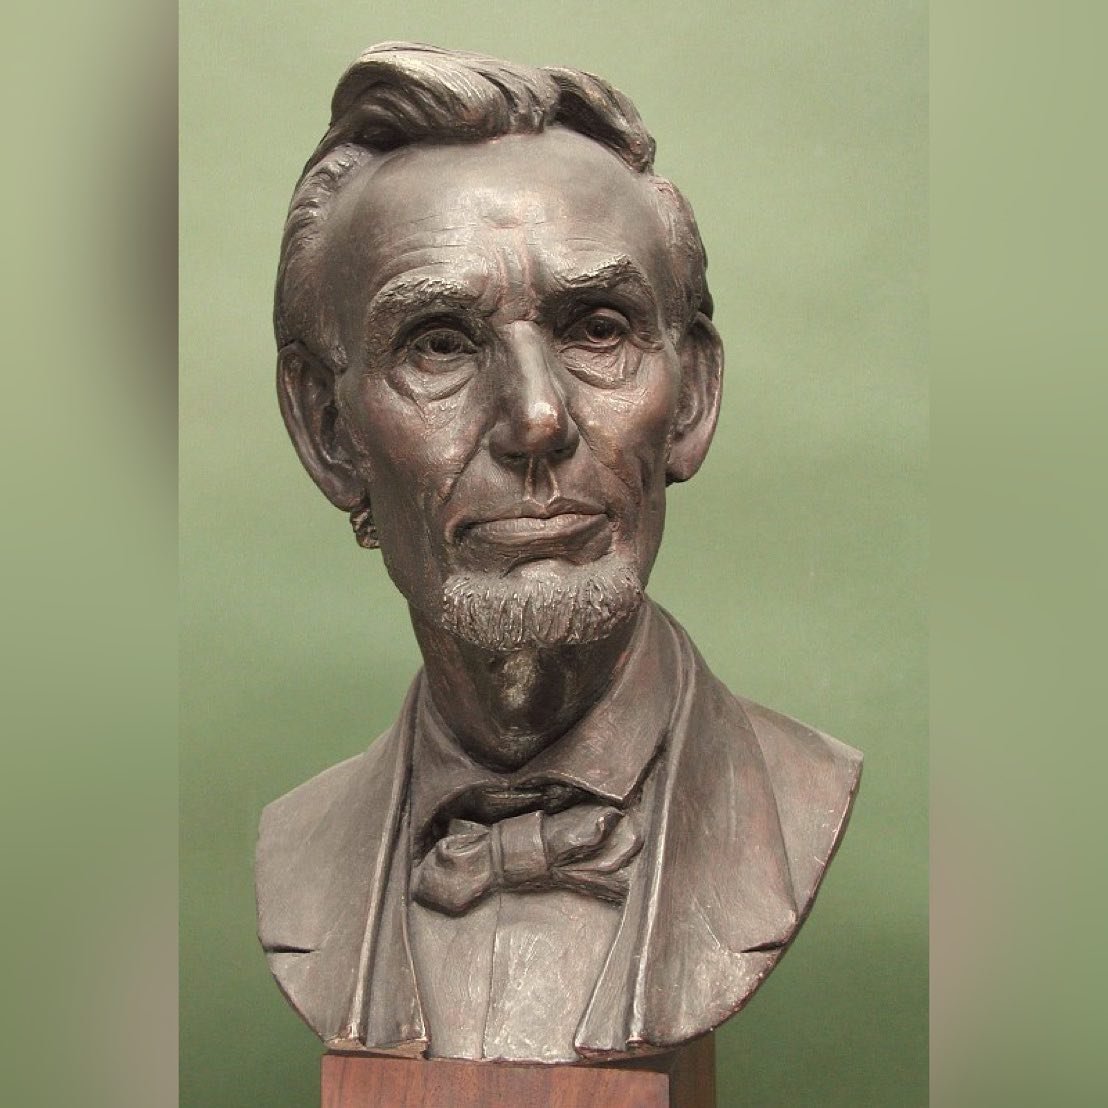 Old Abe, portrait sculpture of Abraham Lincoln